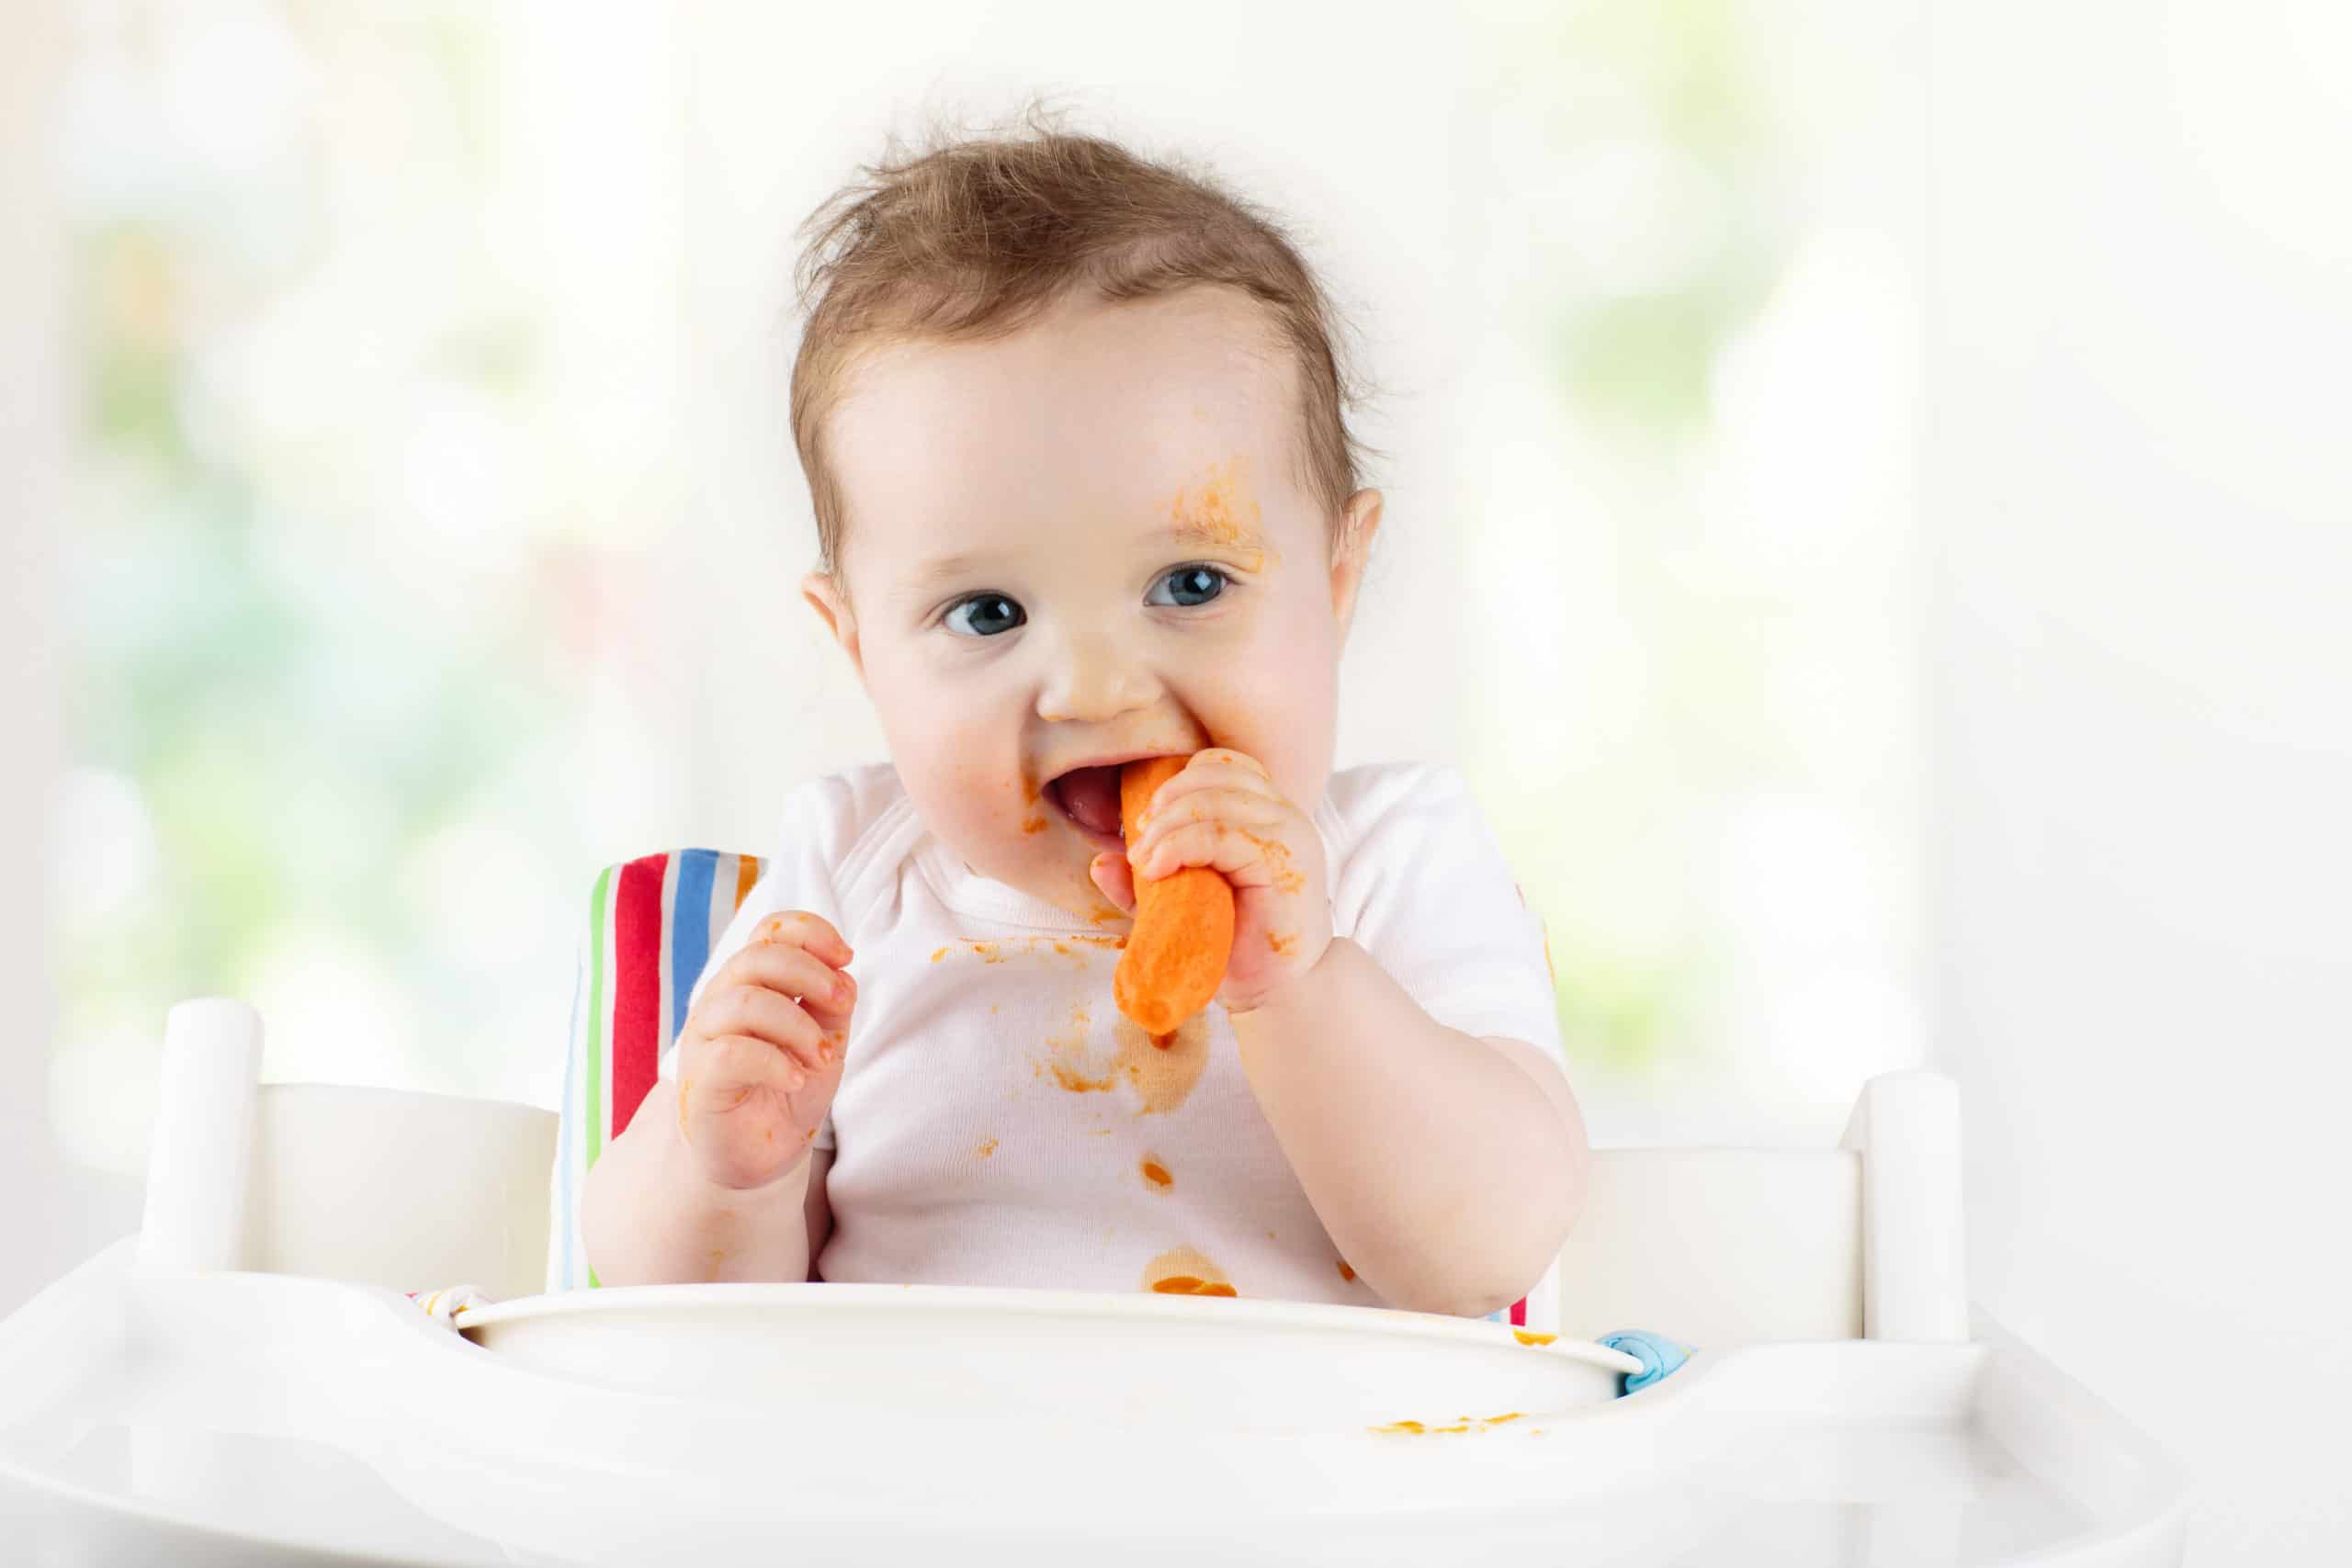 Choking and Baby-Led Weaning: What You Need to Know